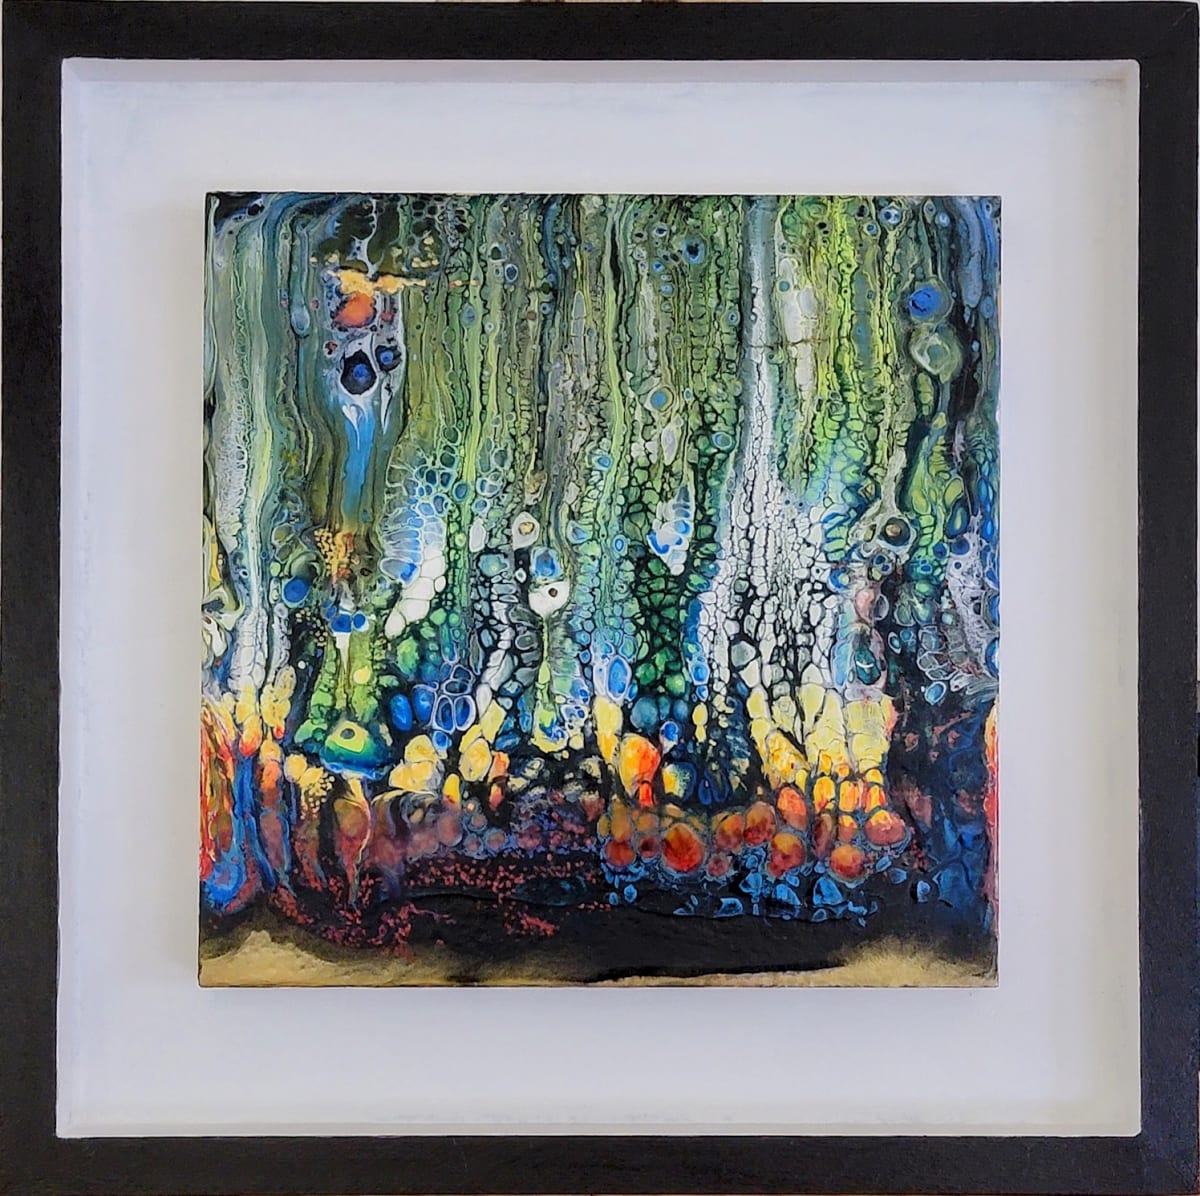 A Prayer For Bucha by Studio Relics by Linda joy Weinstein  Image: Prayer for Bucha 
Acrylic, enamel and alcohol ink on a cradled birch support